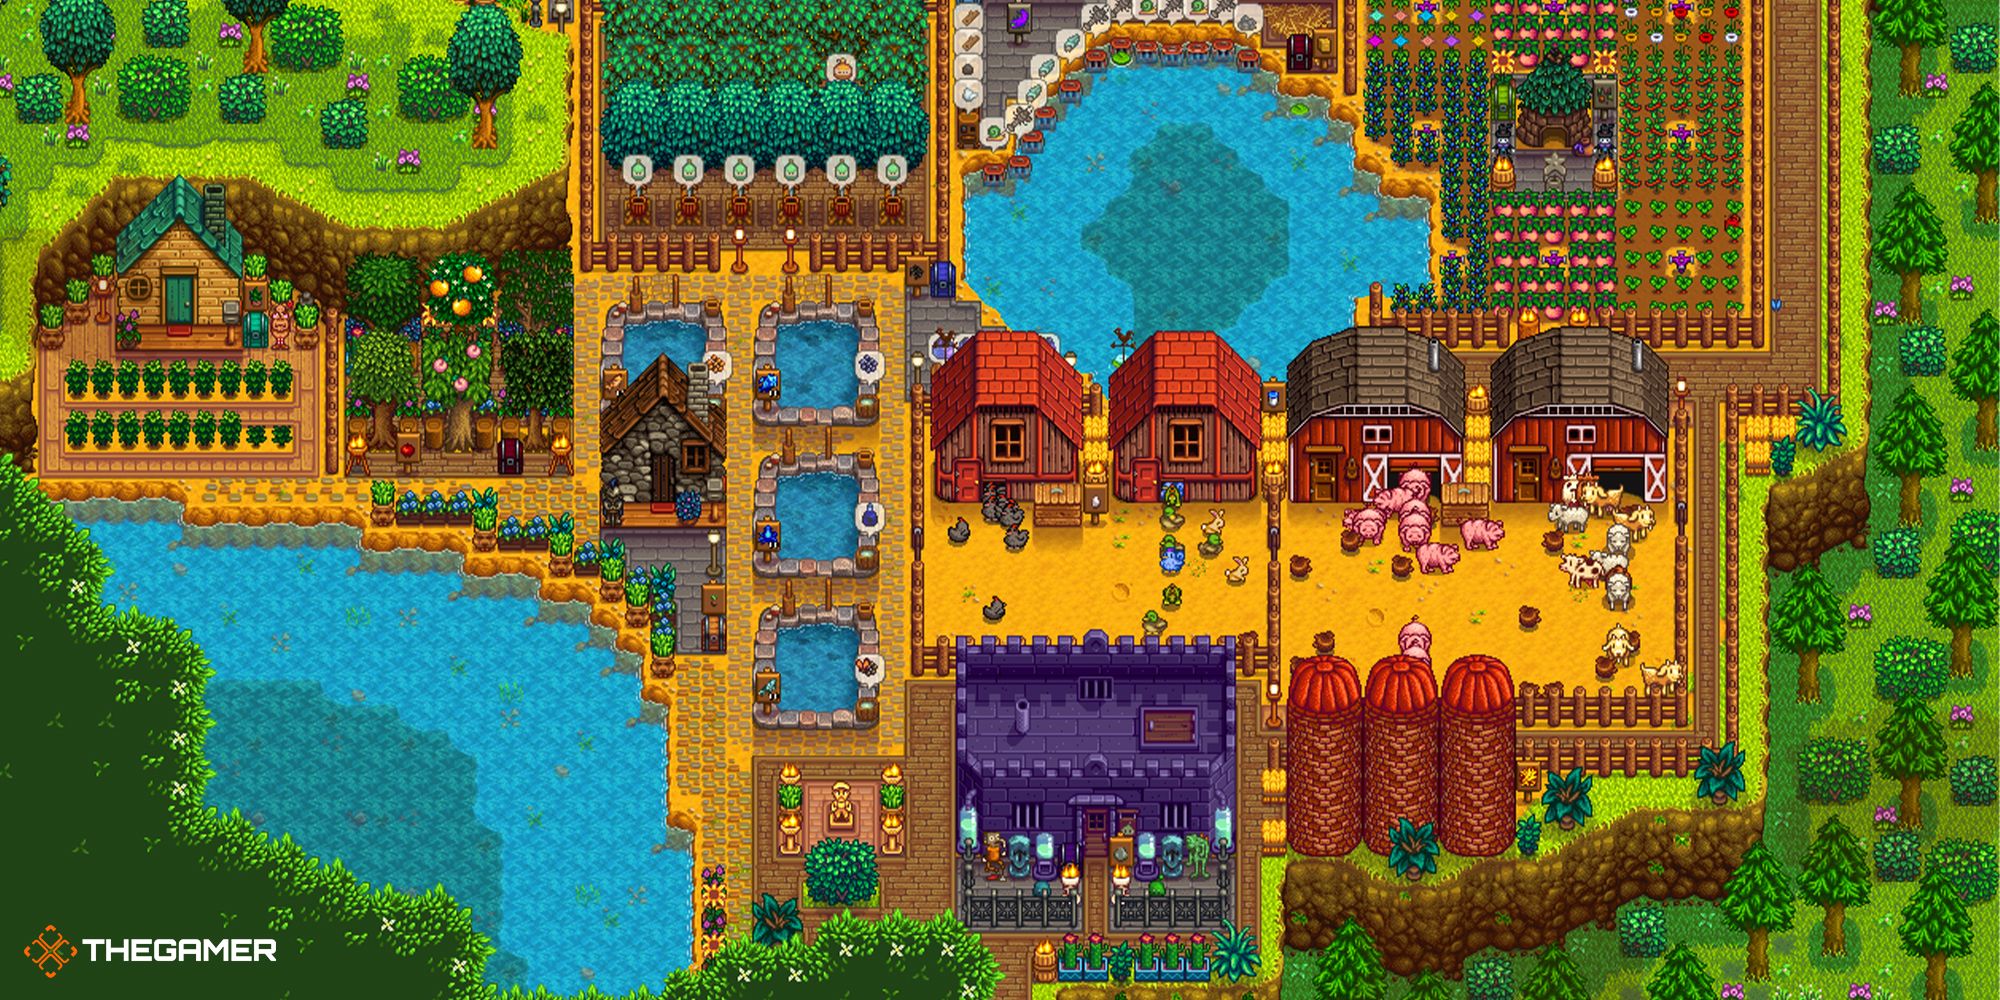 A fully populated Wilderness Farm in Stardew Valley, filled with animal houses and a slime hutch